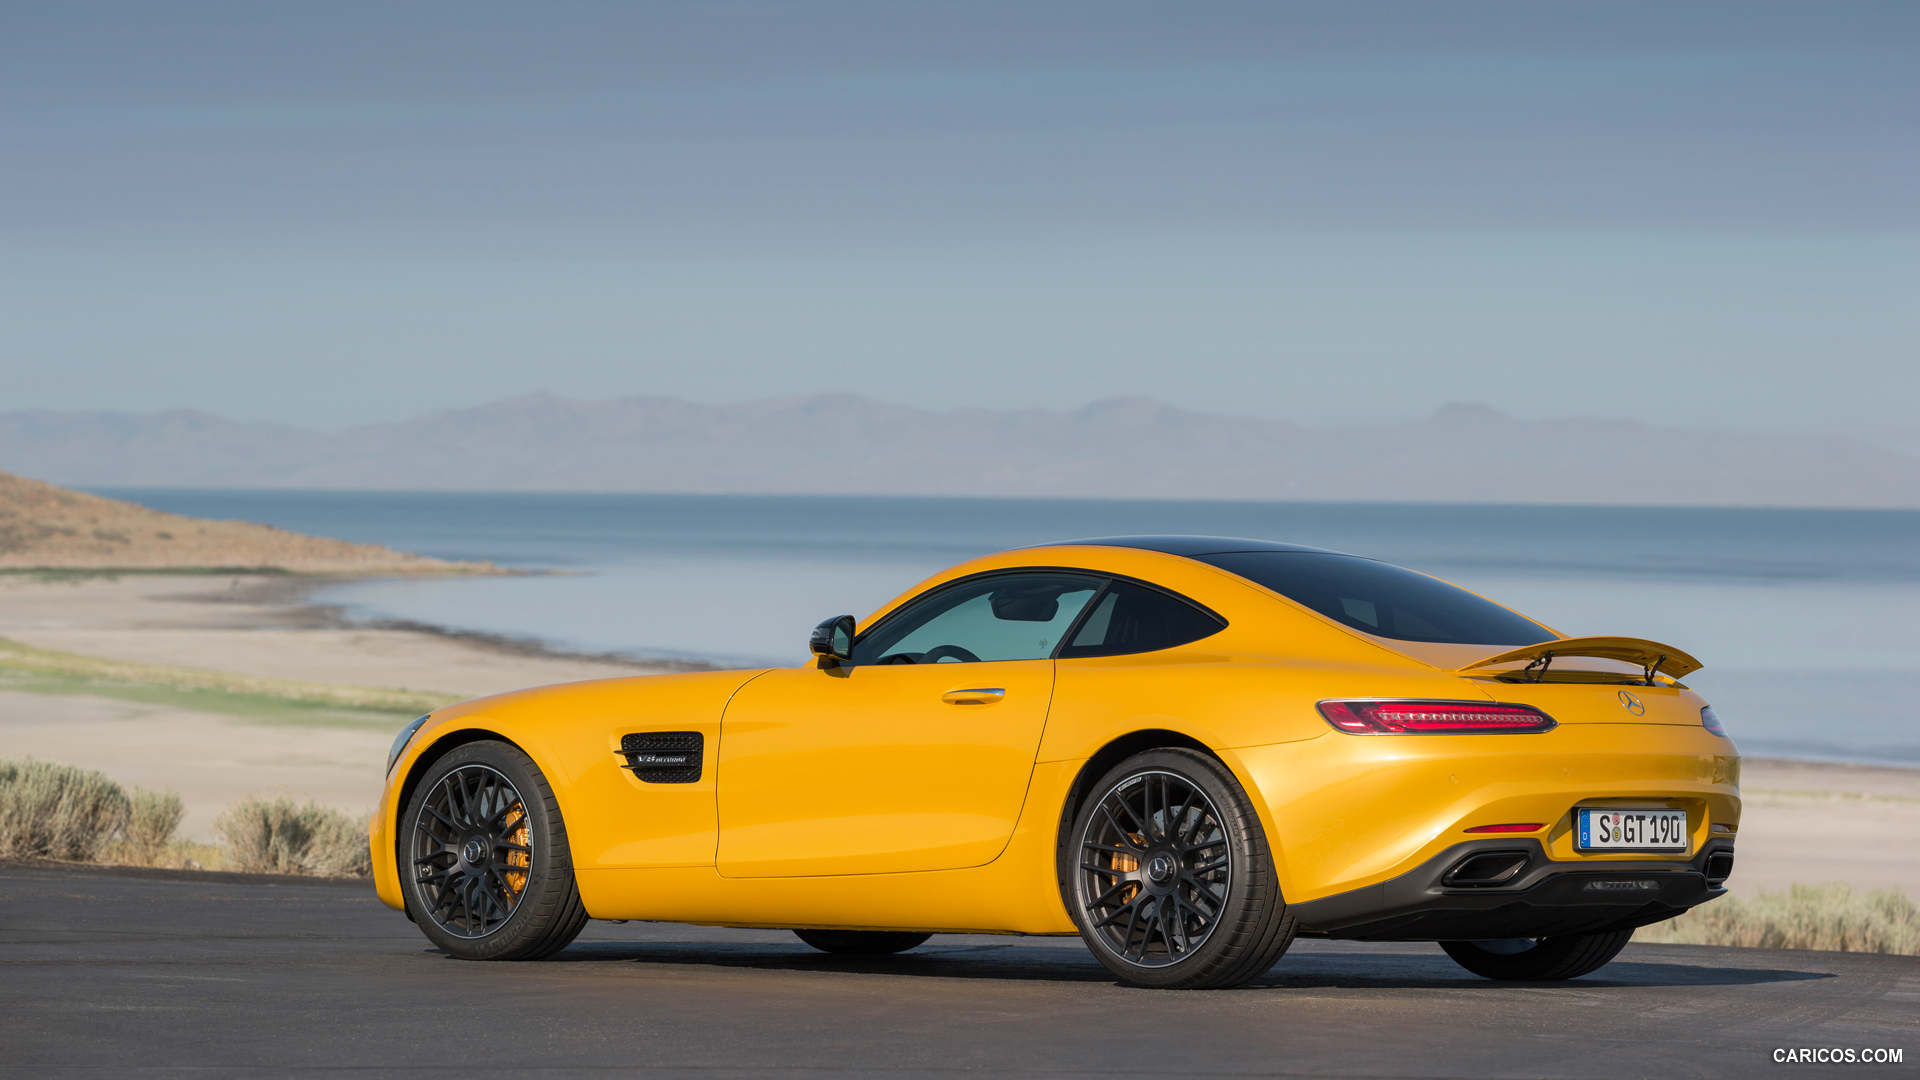 2016 Mercedes-AMG GT Exterior Night Package (Solarbeam) - Rear, #101 of 190